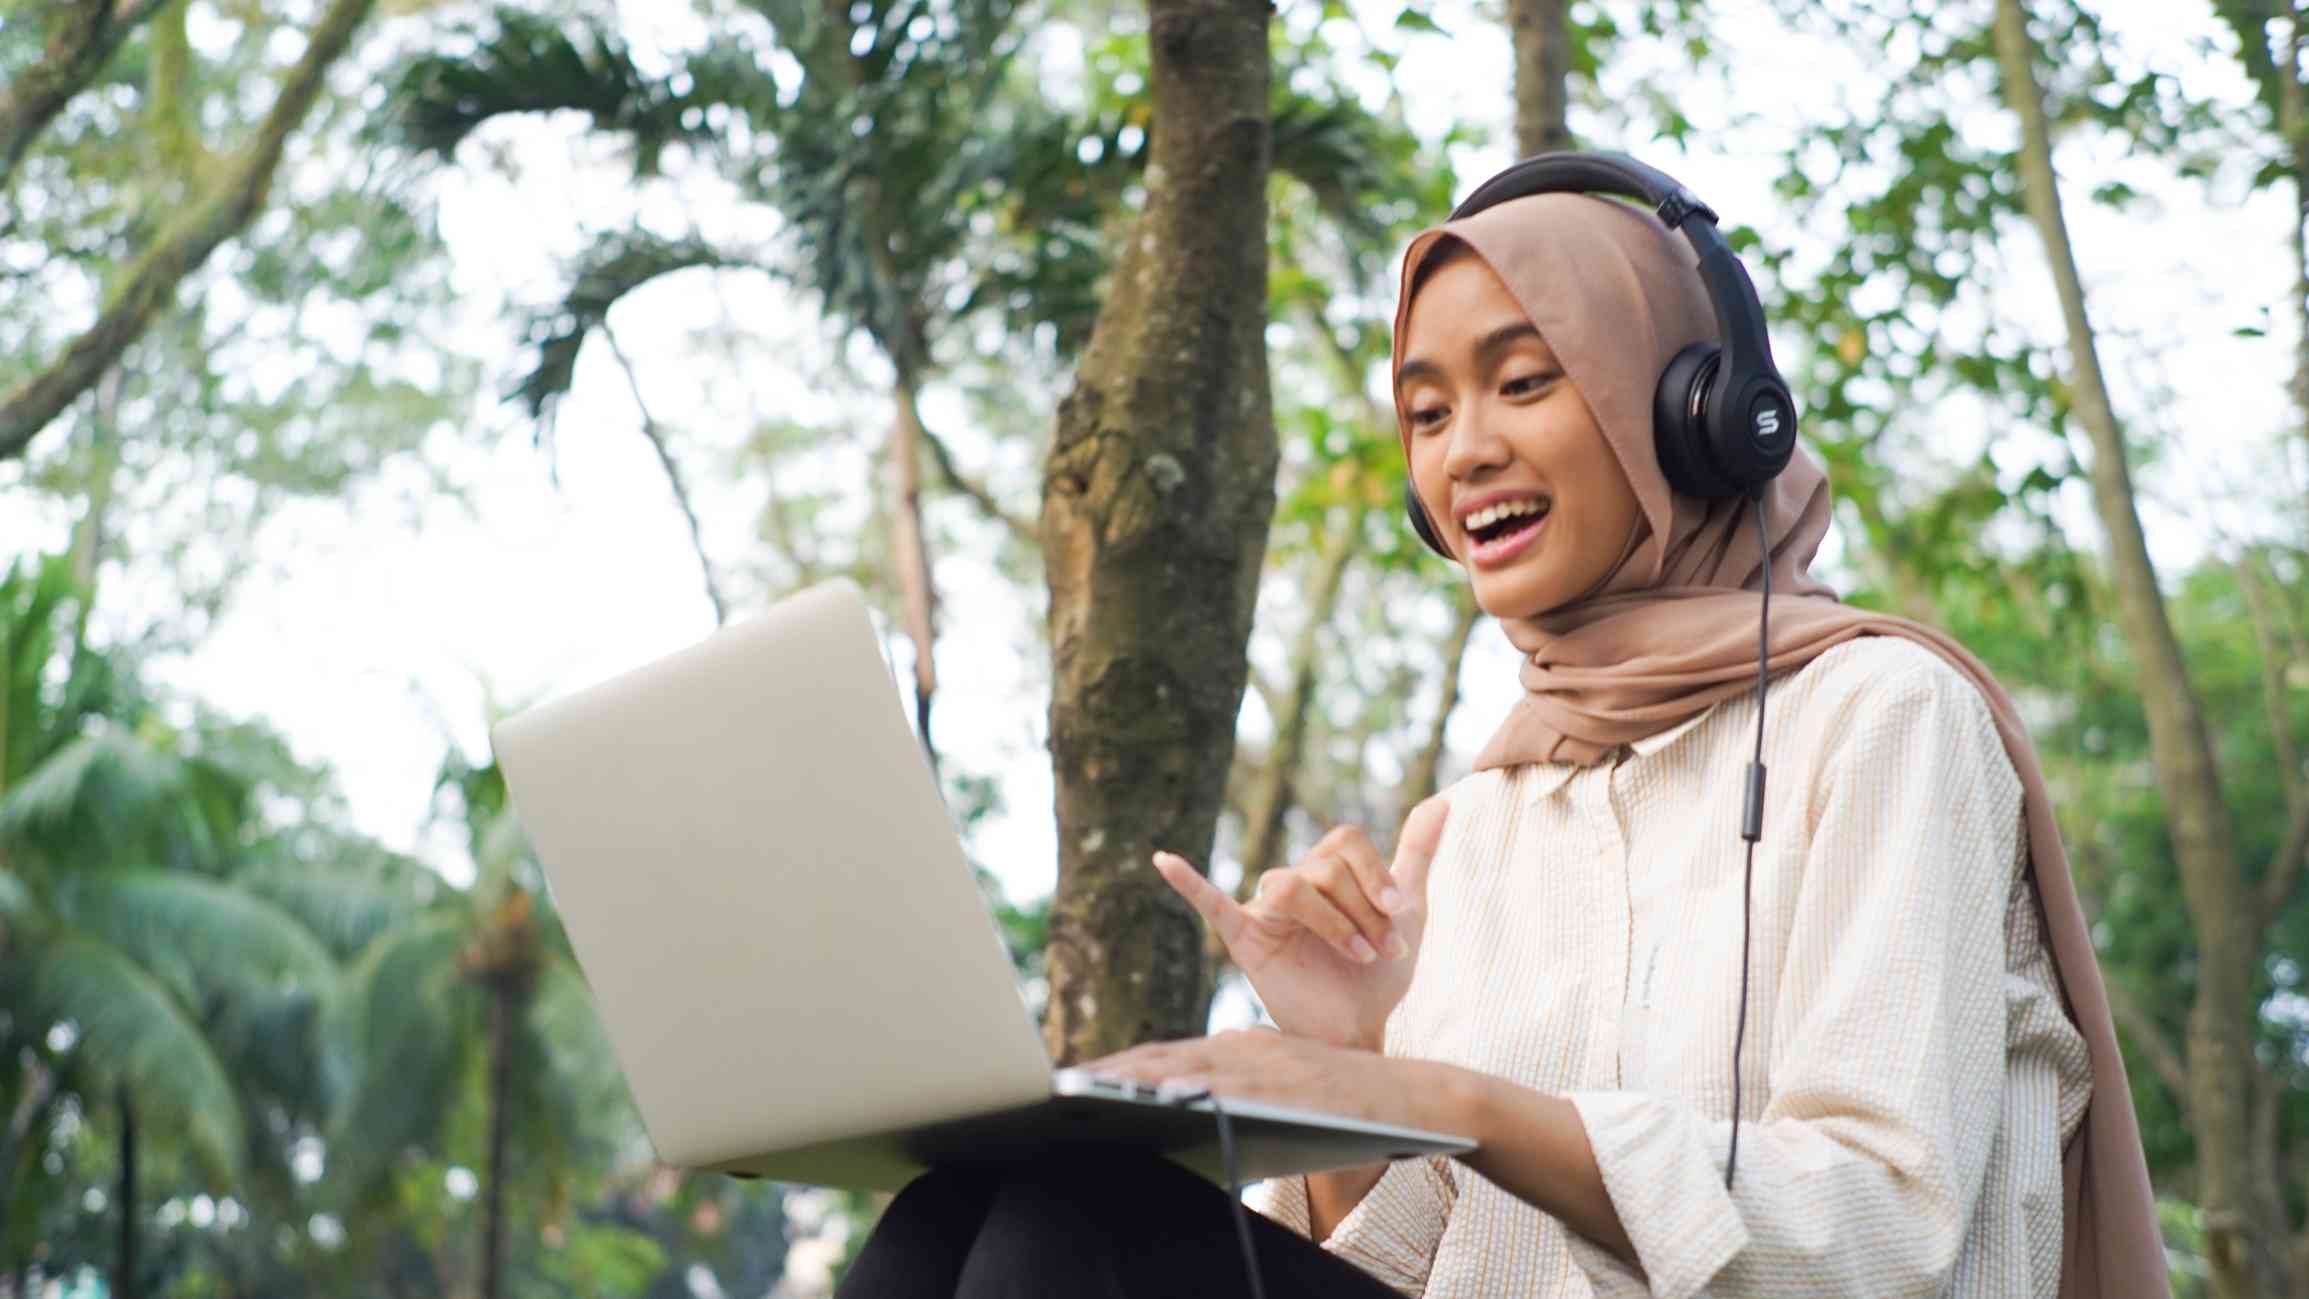 A woman in a tan hijab signs to her laptop screen while sitting outside and wearing headphones.